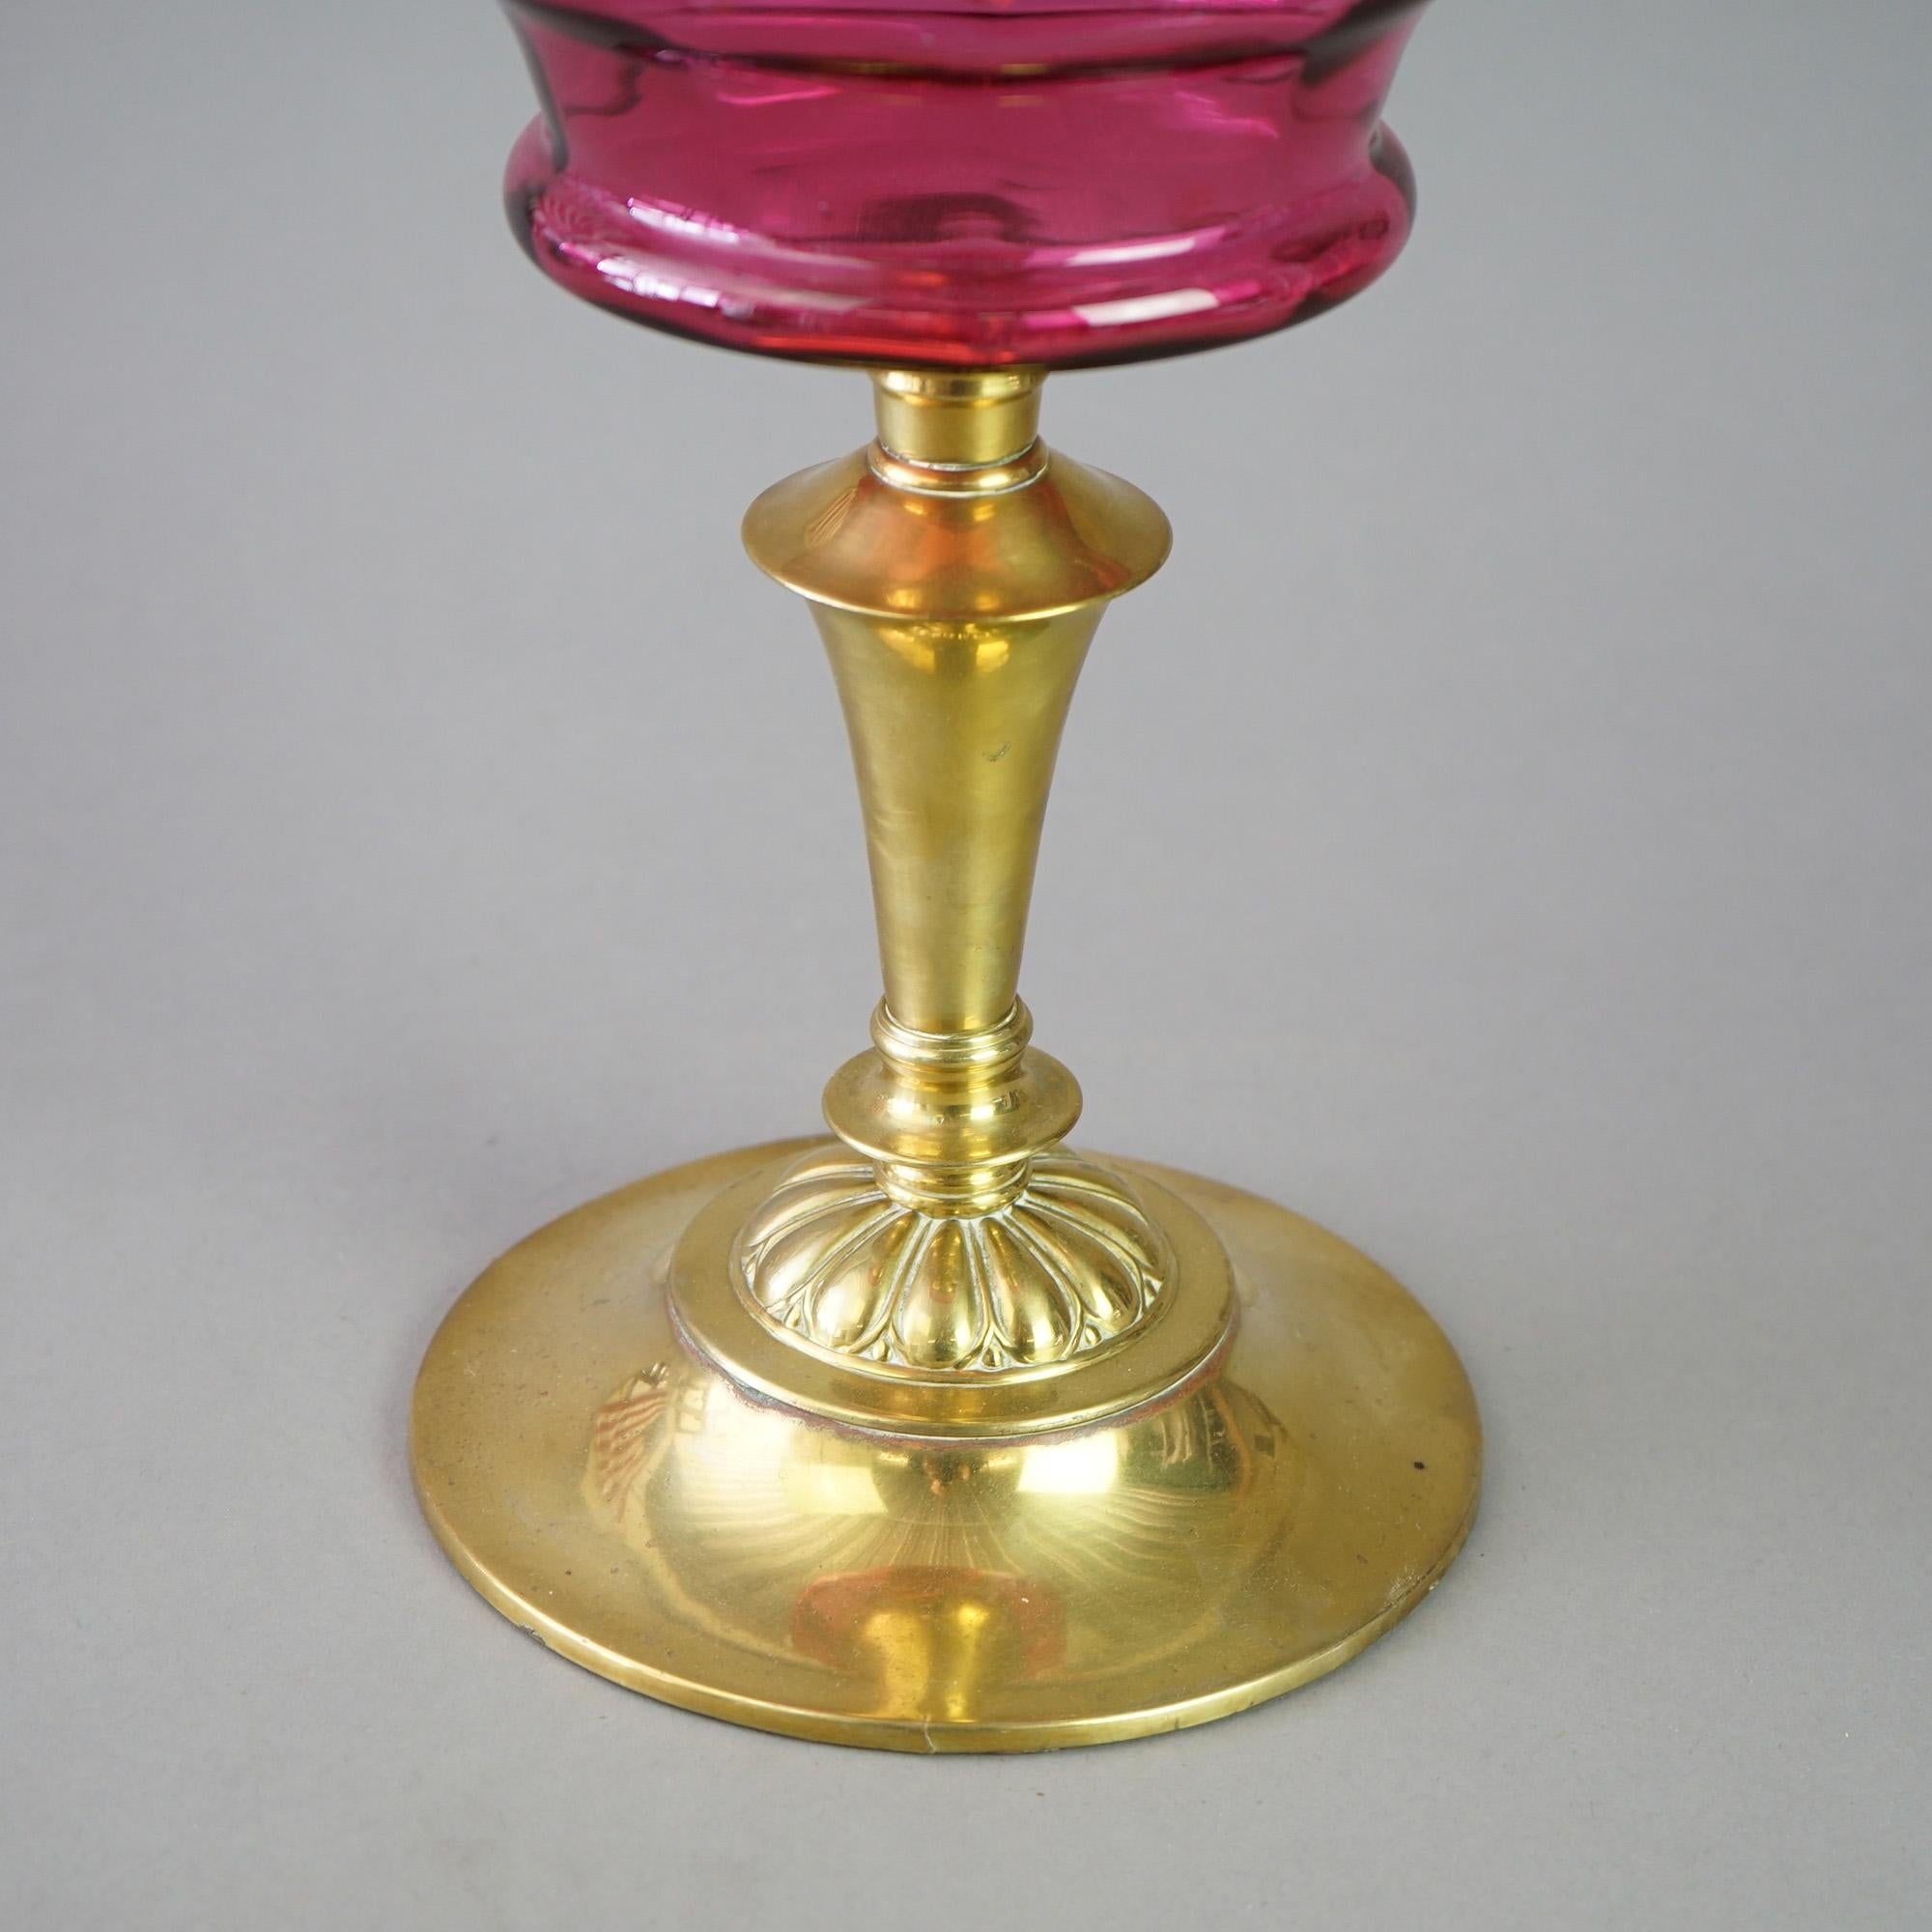 Antique Brass &Cranberry Glass “Gone With The Wind” Oil Lamp C1890 For Sale 6